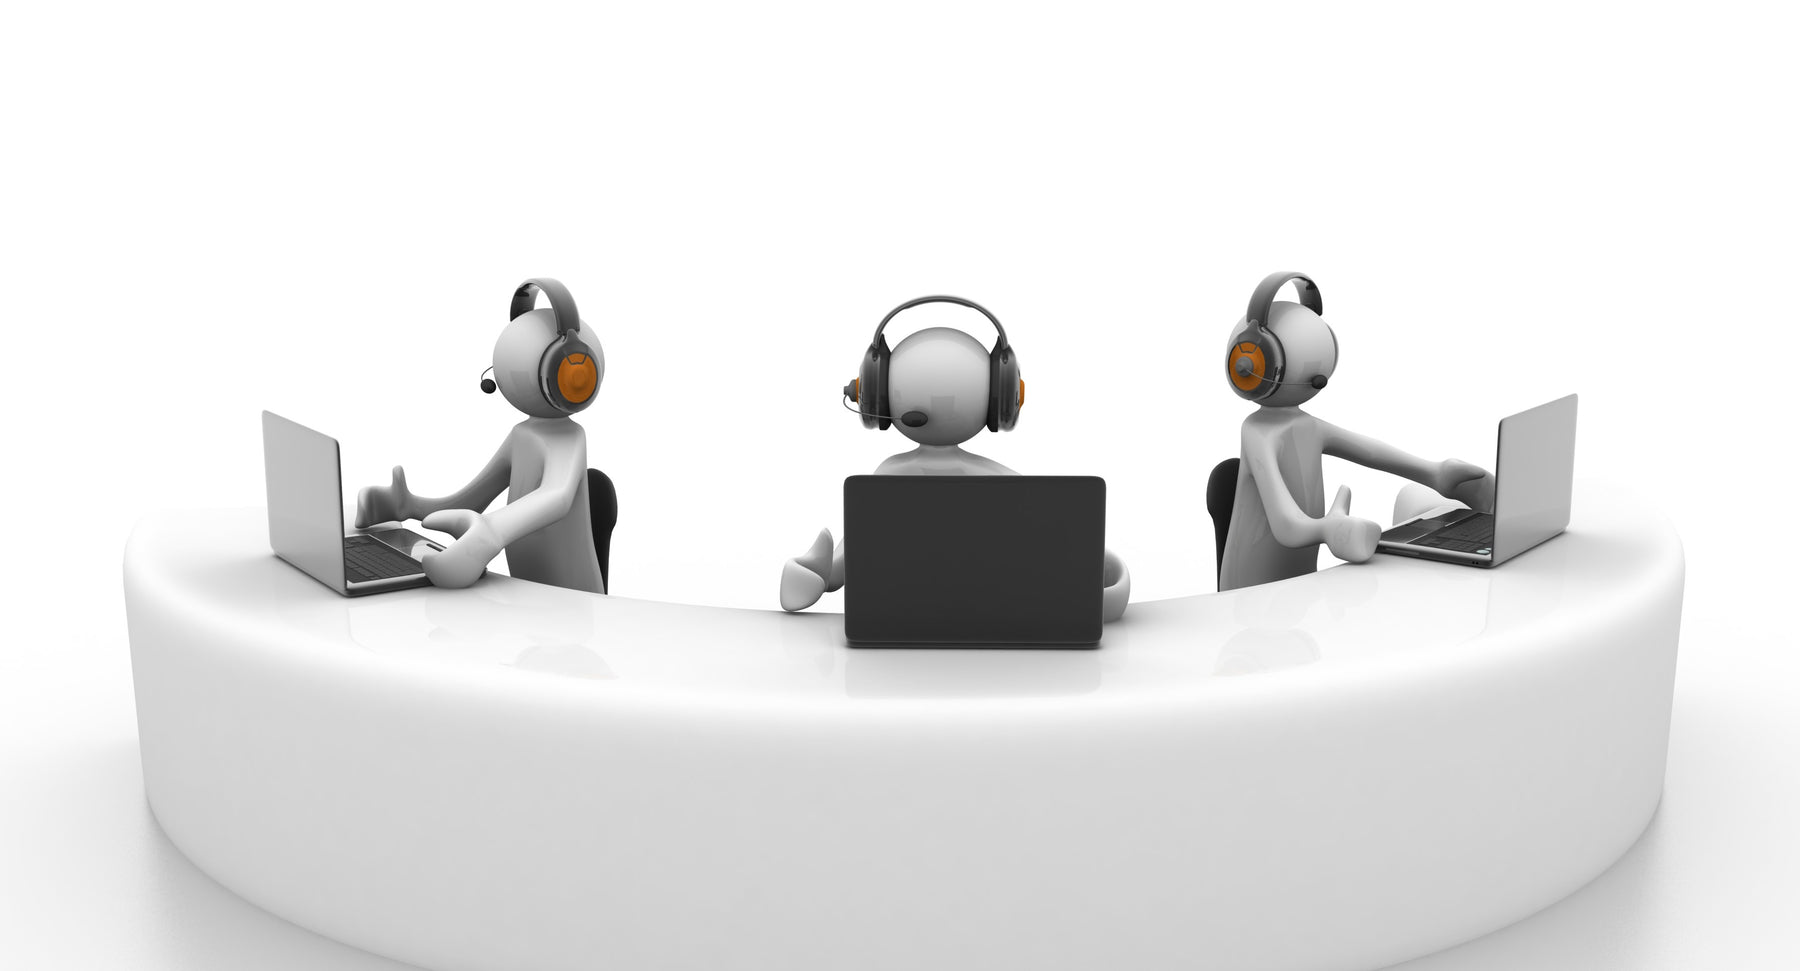 Importance of active help desk support